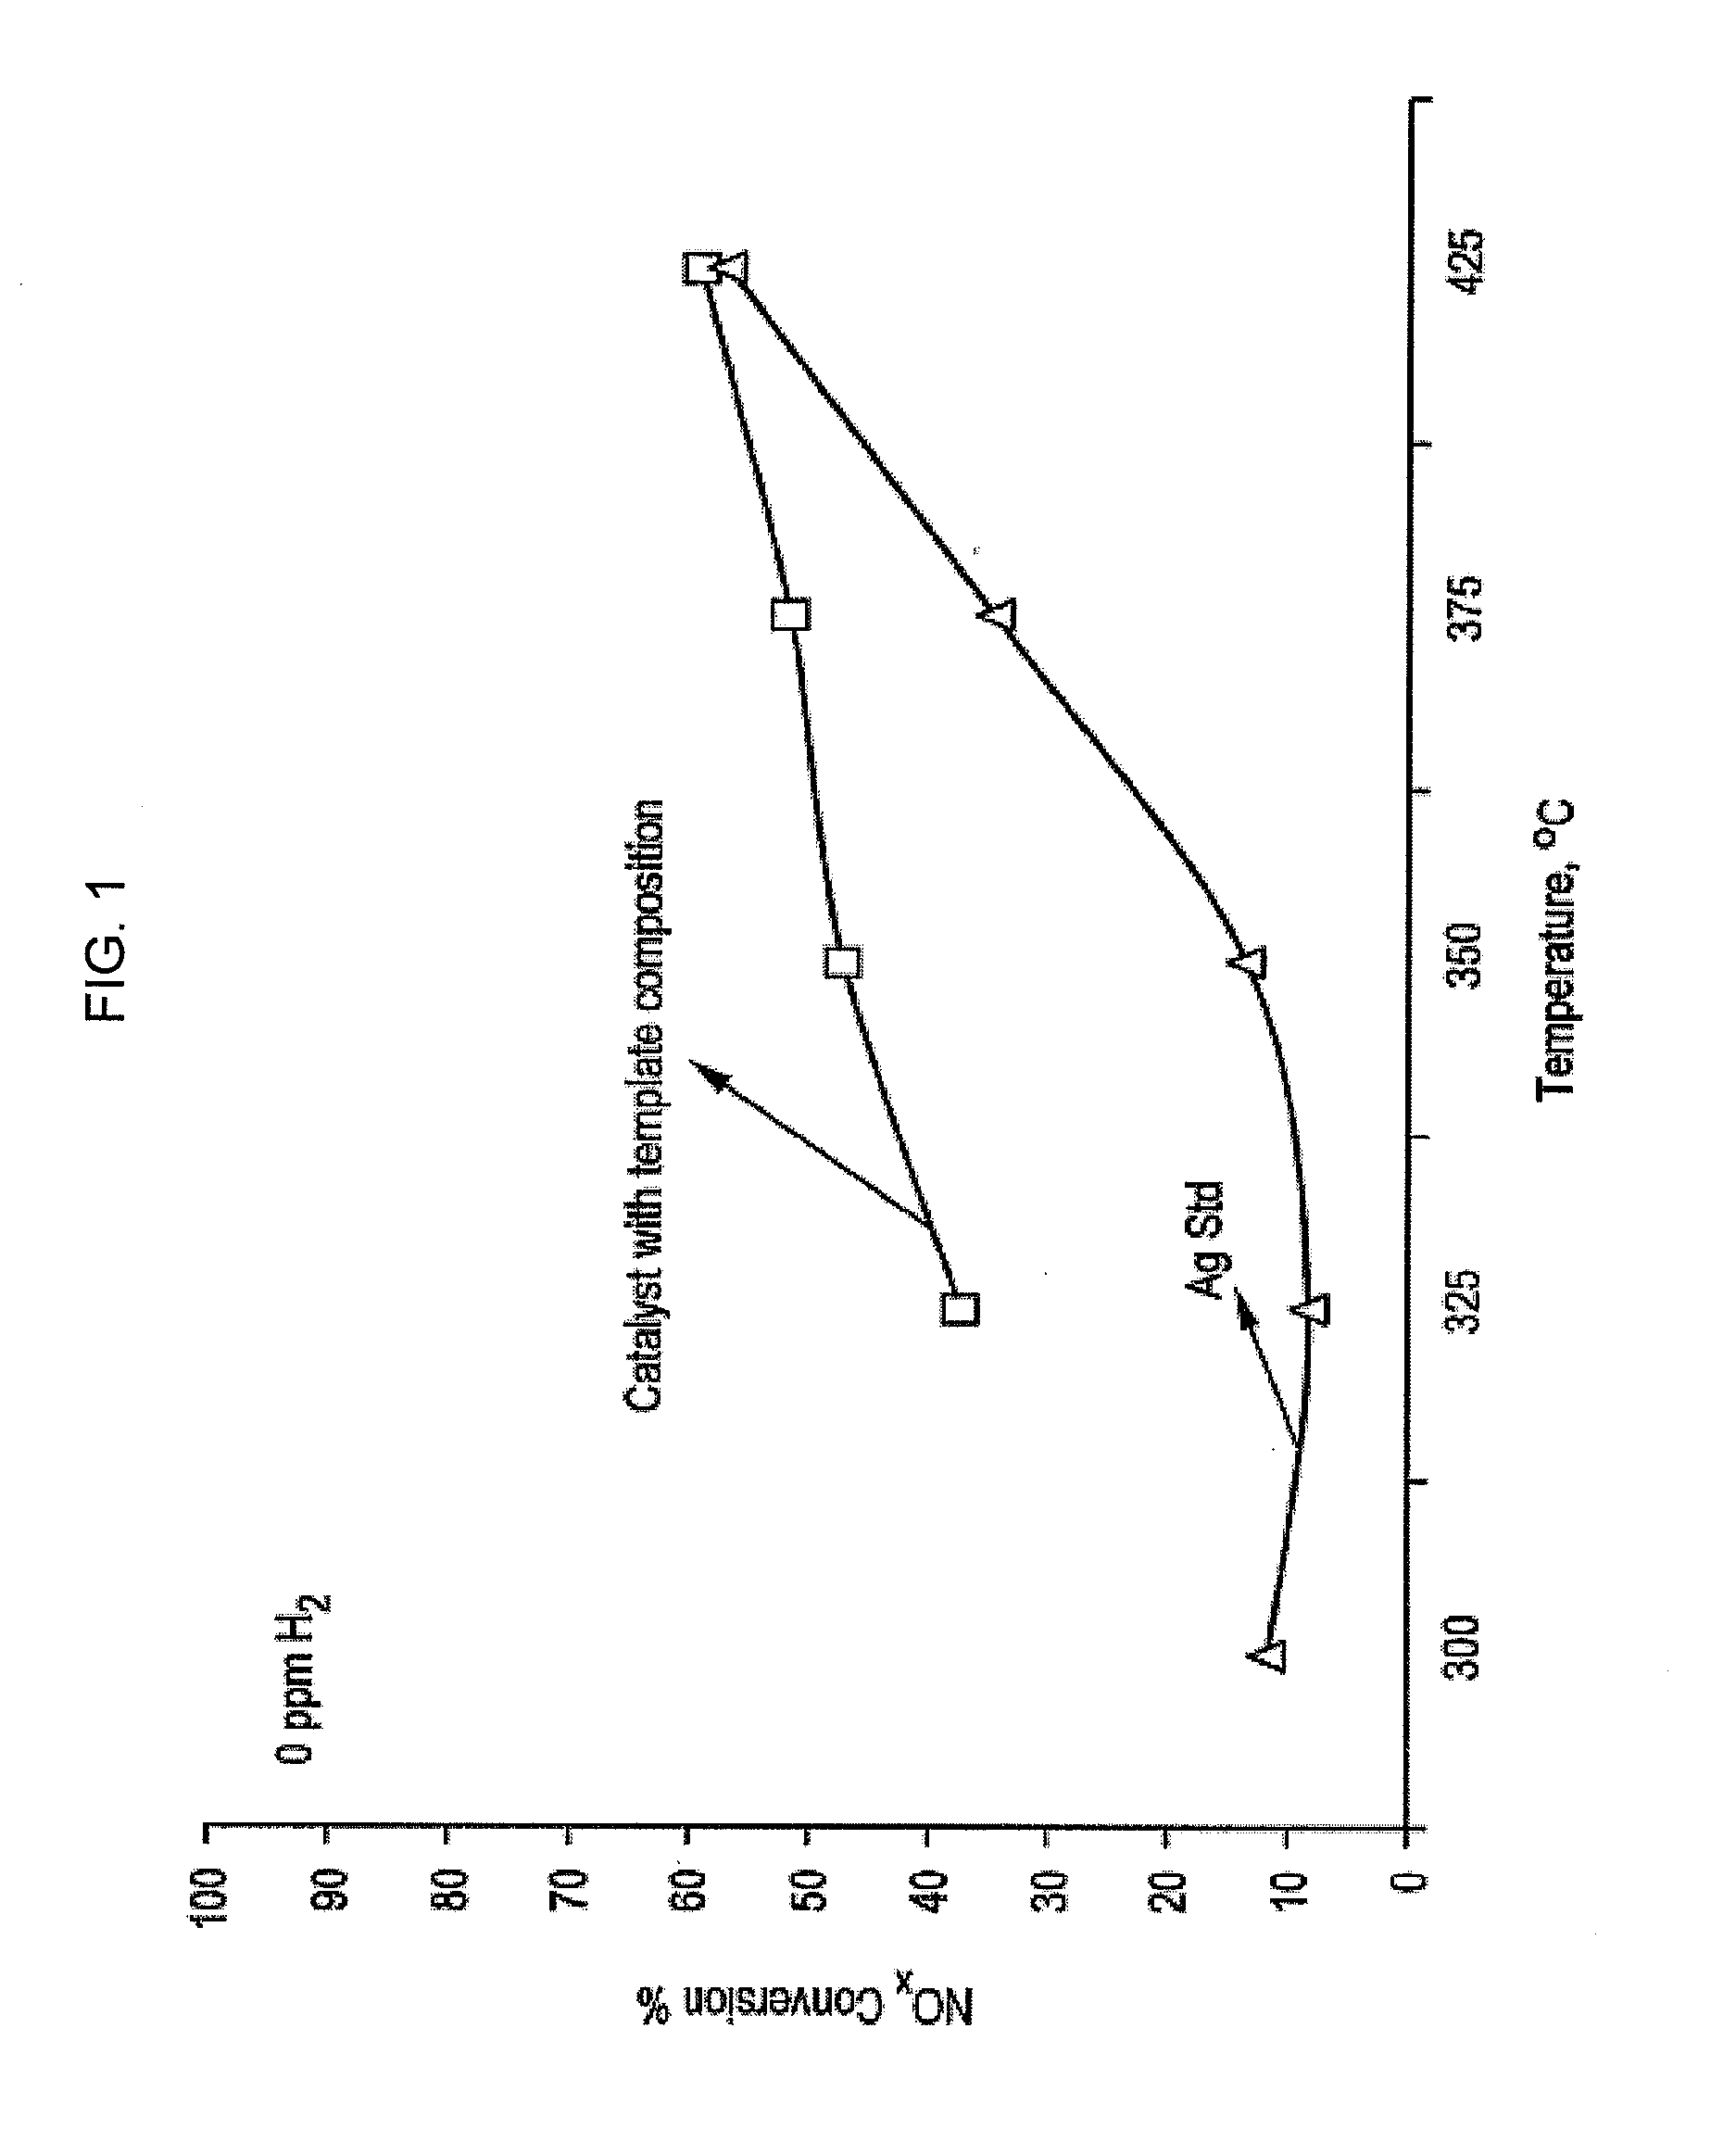 System and Method for Controlling Nitrous Oxide Emissions of an Internal Combustion Engine and Regeneration of an Exhaust Treatment Device